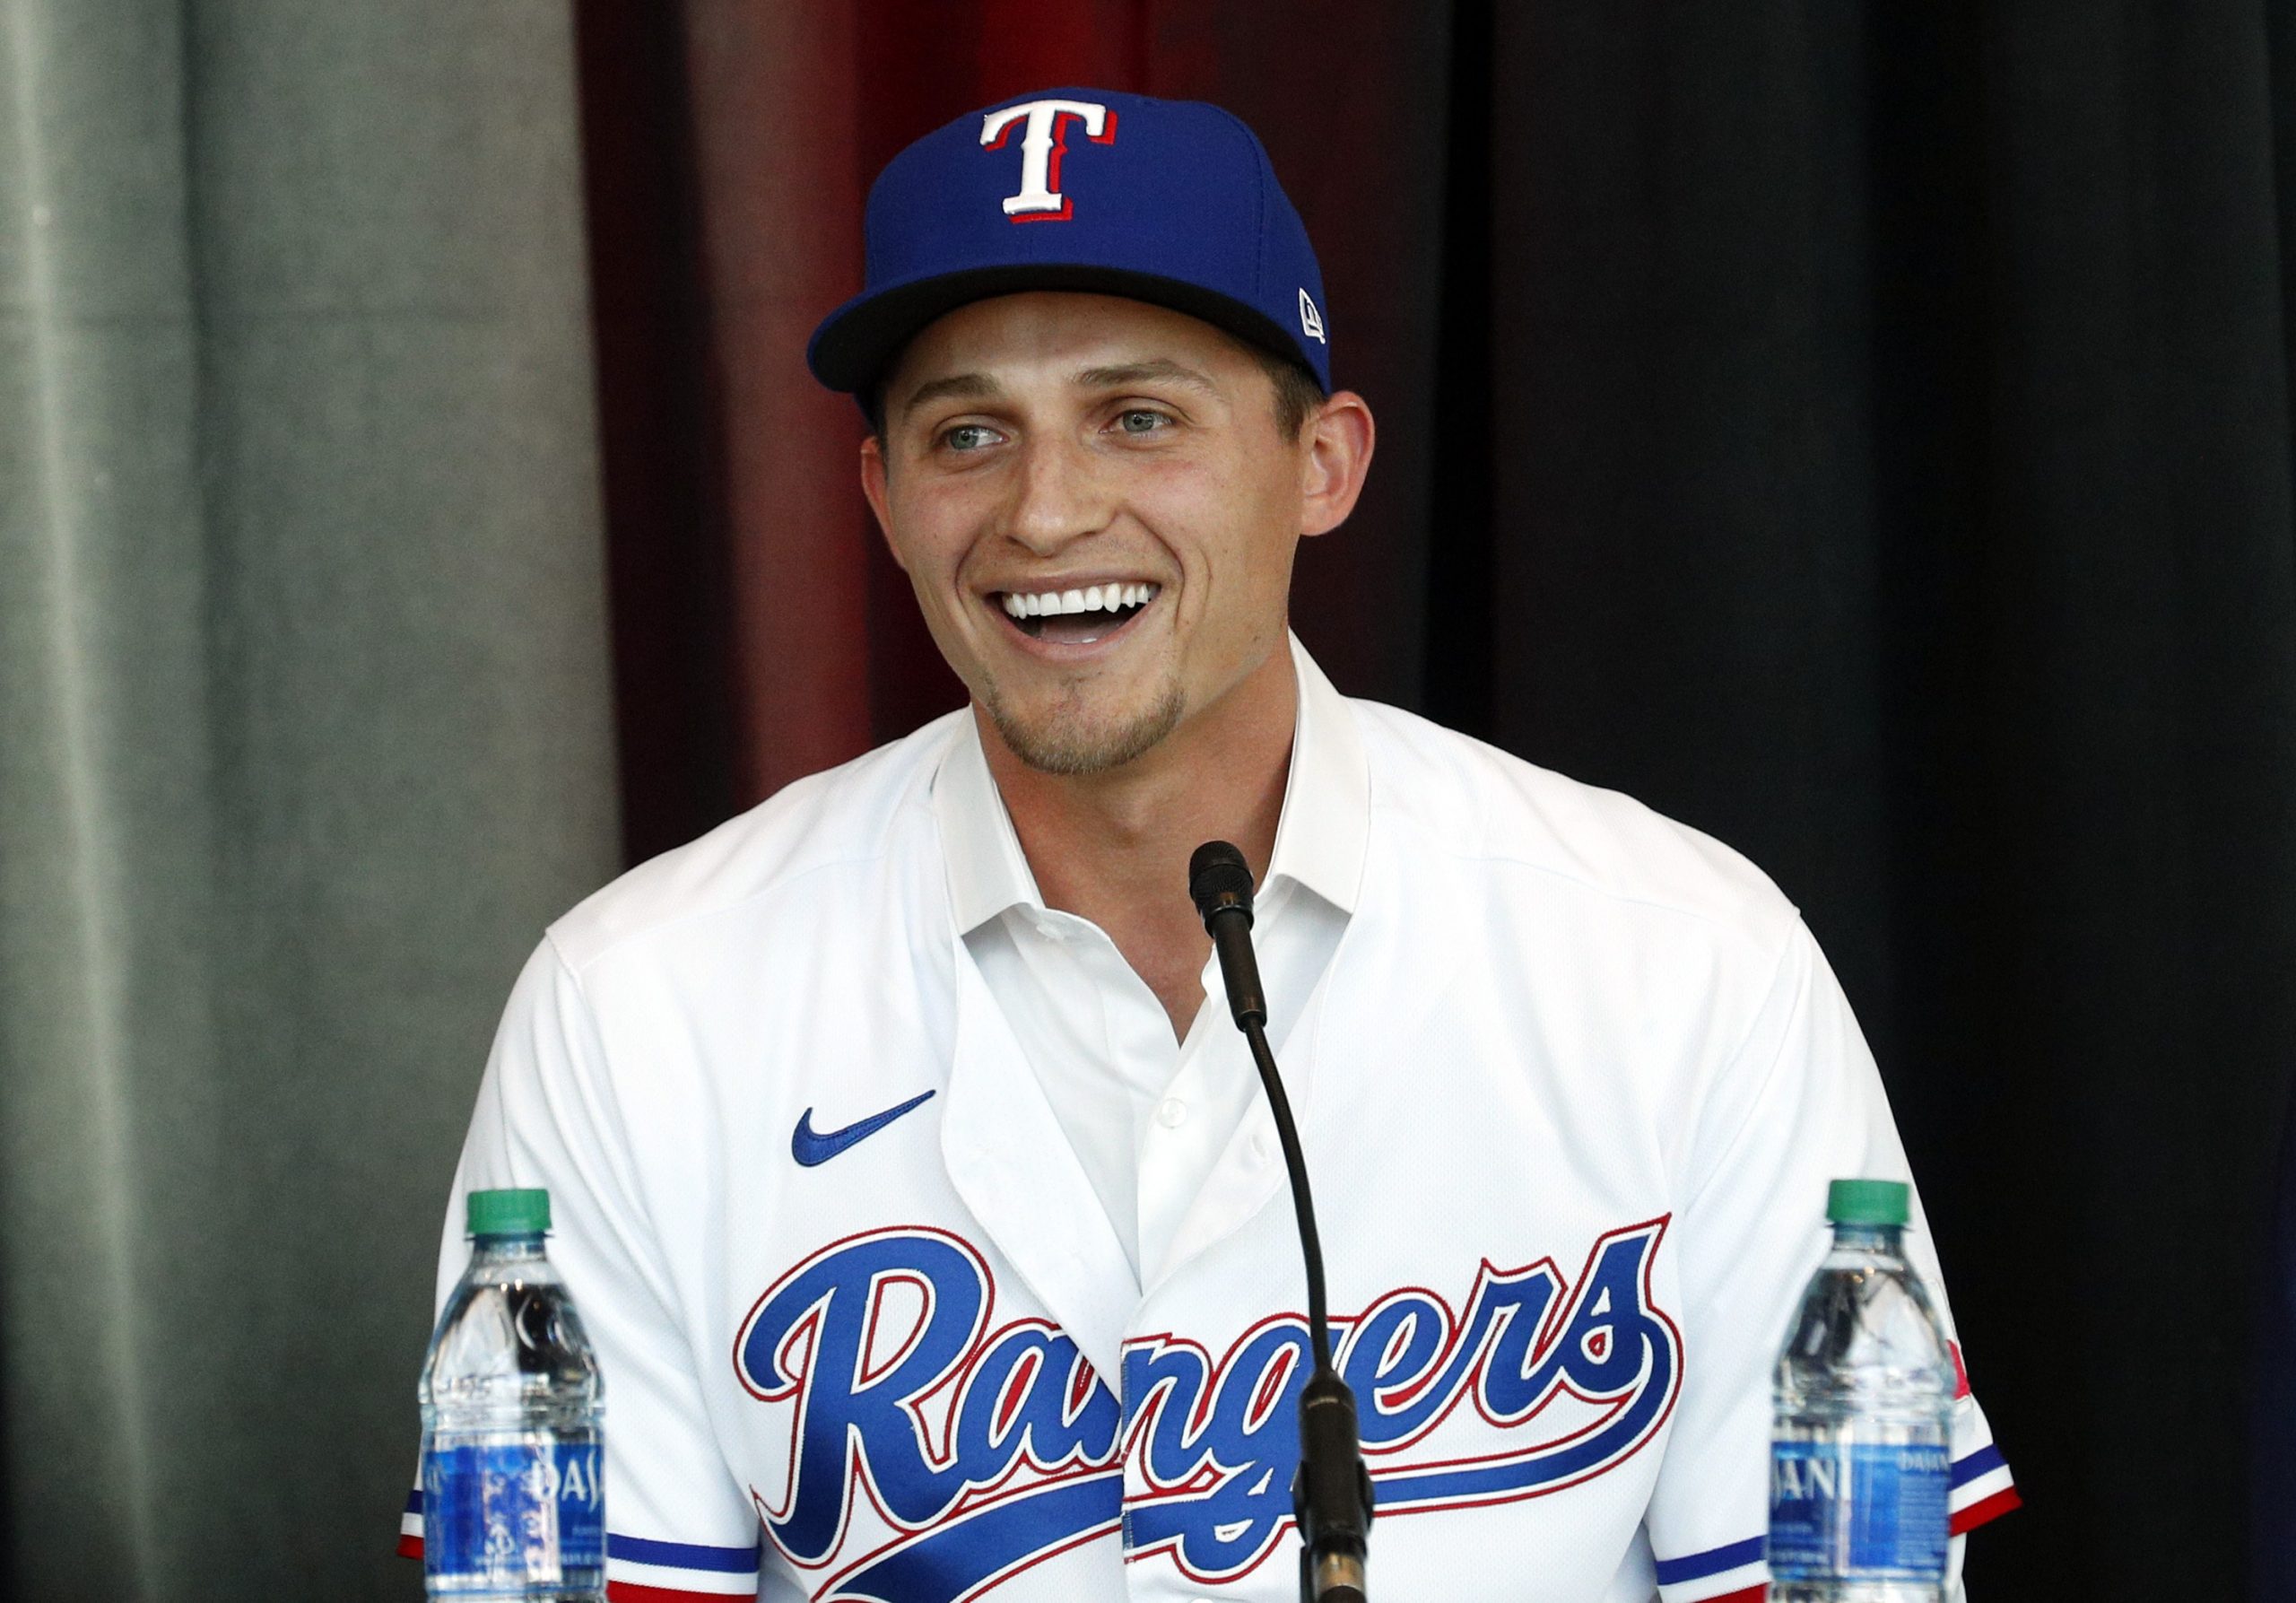 New Texas Rangers infielder Corey Seager speaks at a press conference at Globe Life Field Wednesday, Dec. 1, 2021, in Arlington, Texas. The Texas Rangers have finalized the contracts for their new half-billion dollar middle infield, wrapping up their deals Wednesday, Dec. 1, 2021 with two-time All-Star shortstop Corey Seager and Gold Glove second baseman Marcus Semien.